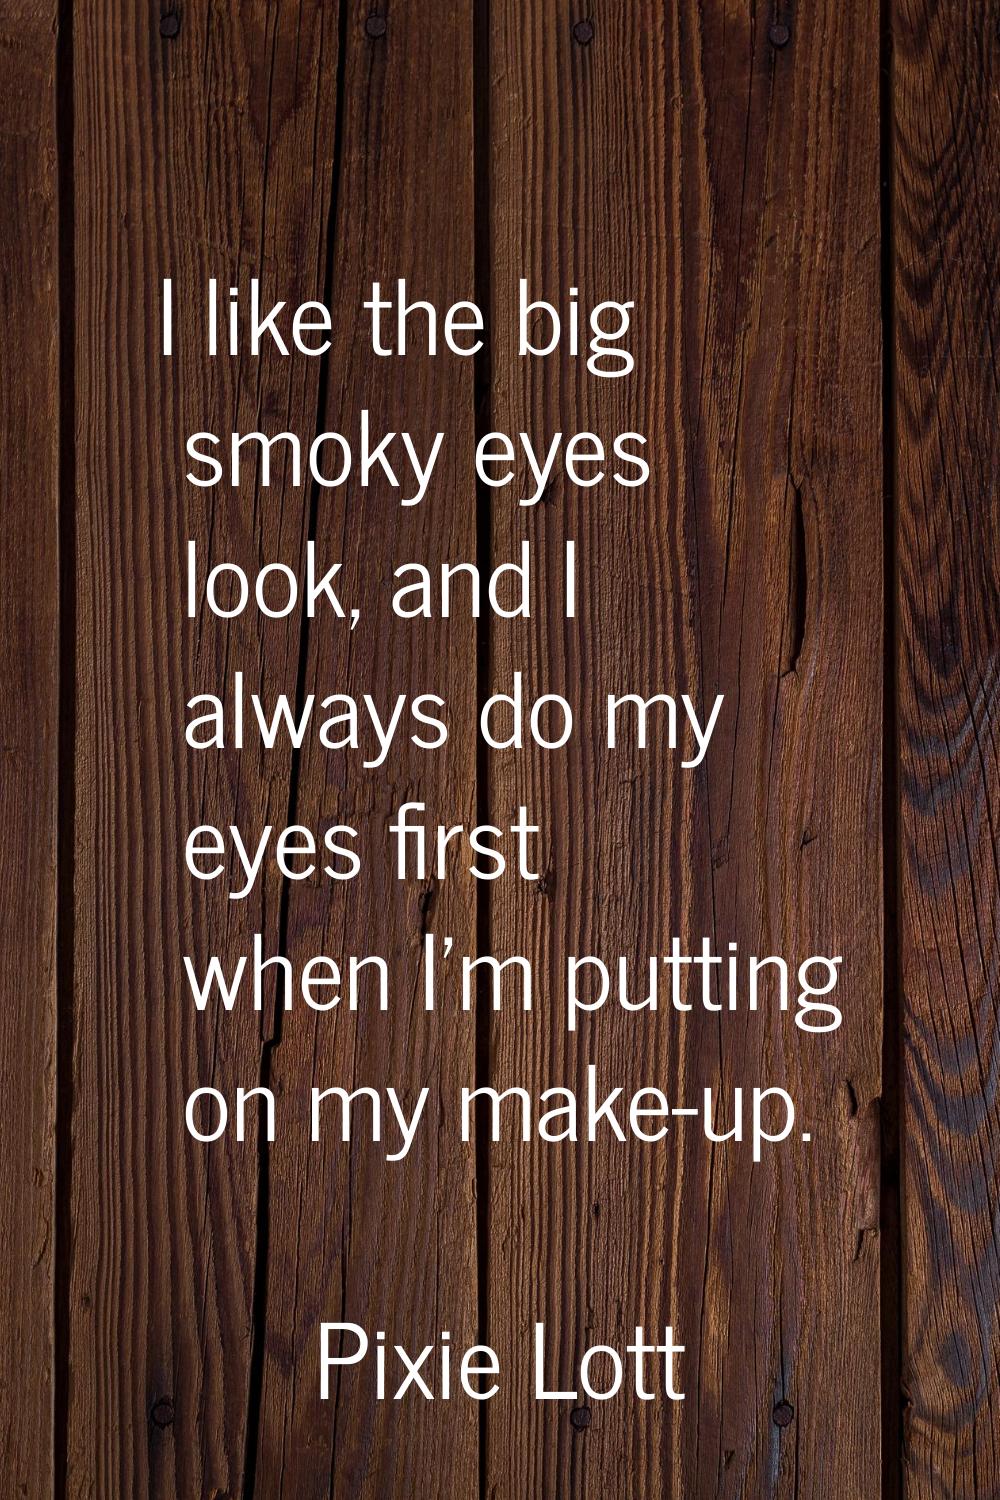 I like the big smoky eyes look, and I always do my eyes first when I'm putting on my make-up.